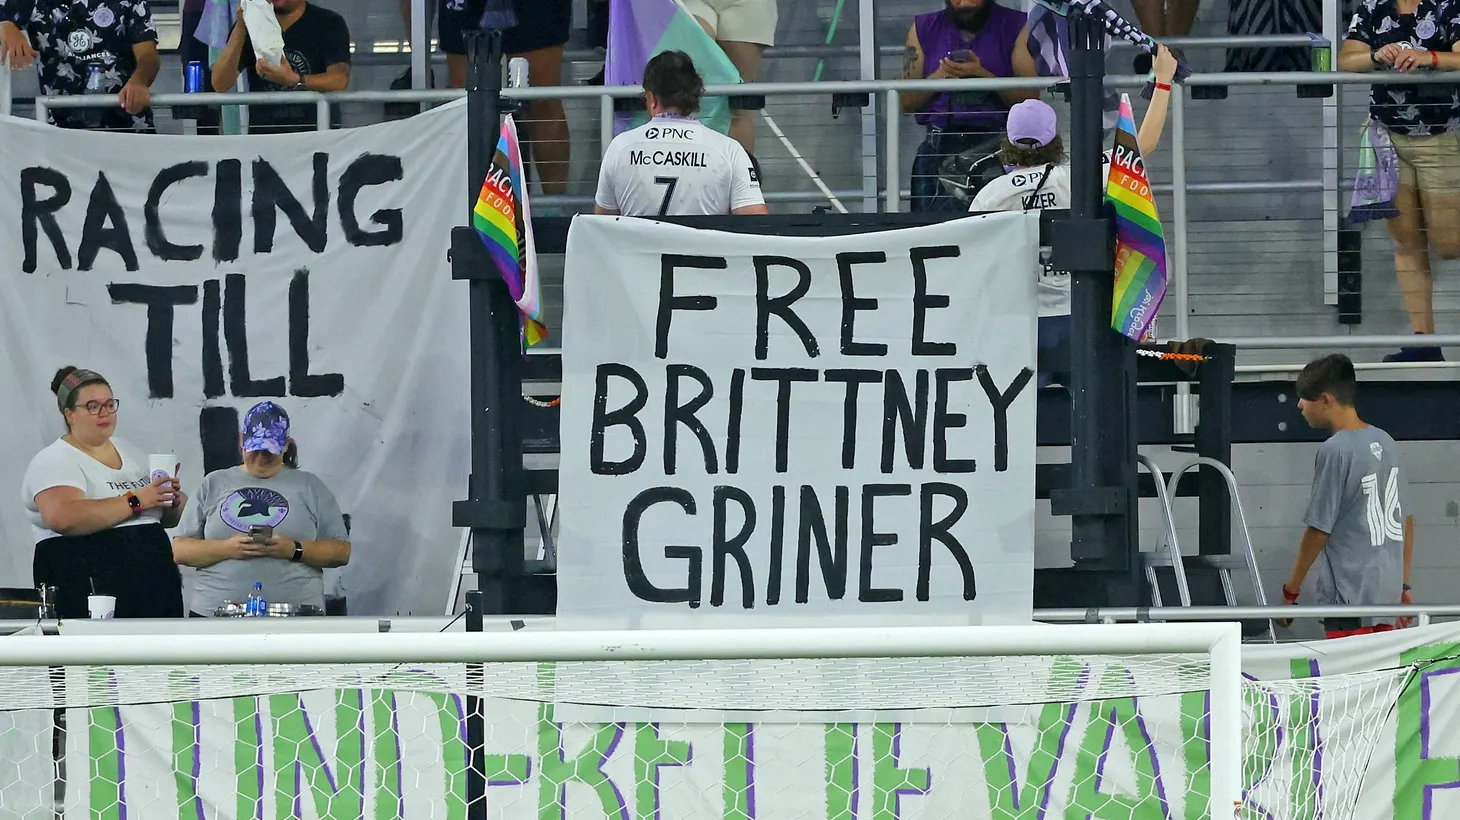 A sign supporting Brittney Griner (not pictured), who has been sentenced to nine and a half years in prison in Russia, is displayed during the first half of the game between the Washington Spirit and Racing Louisville FC at Lynn Family Stadium, Louisville, Kentucky, Aug. 5, 2022.